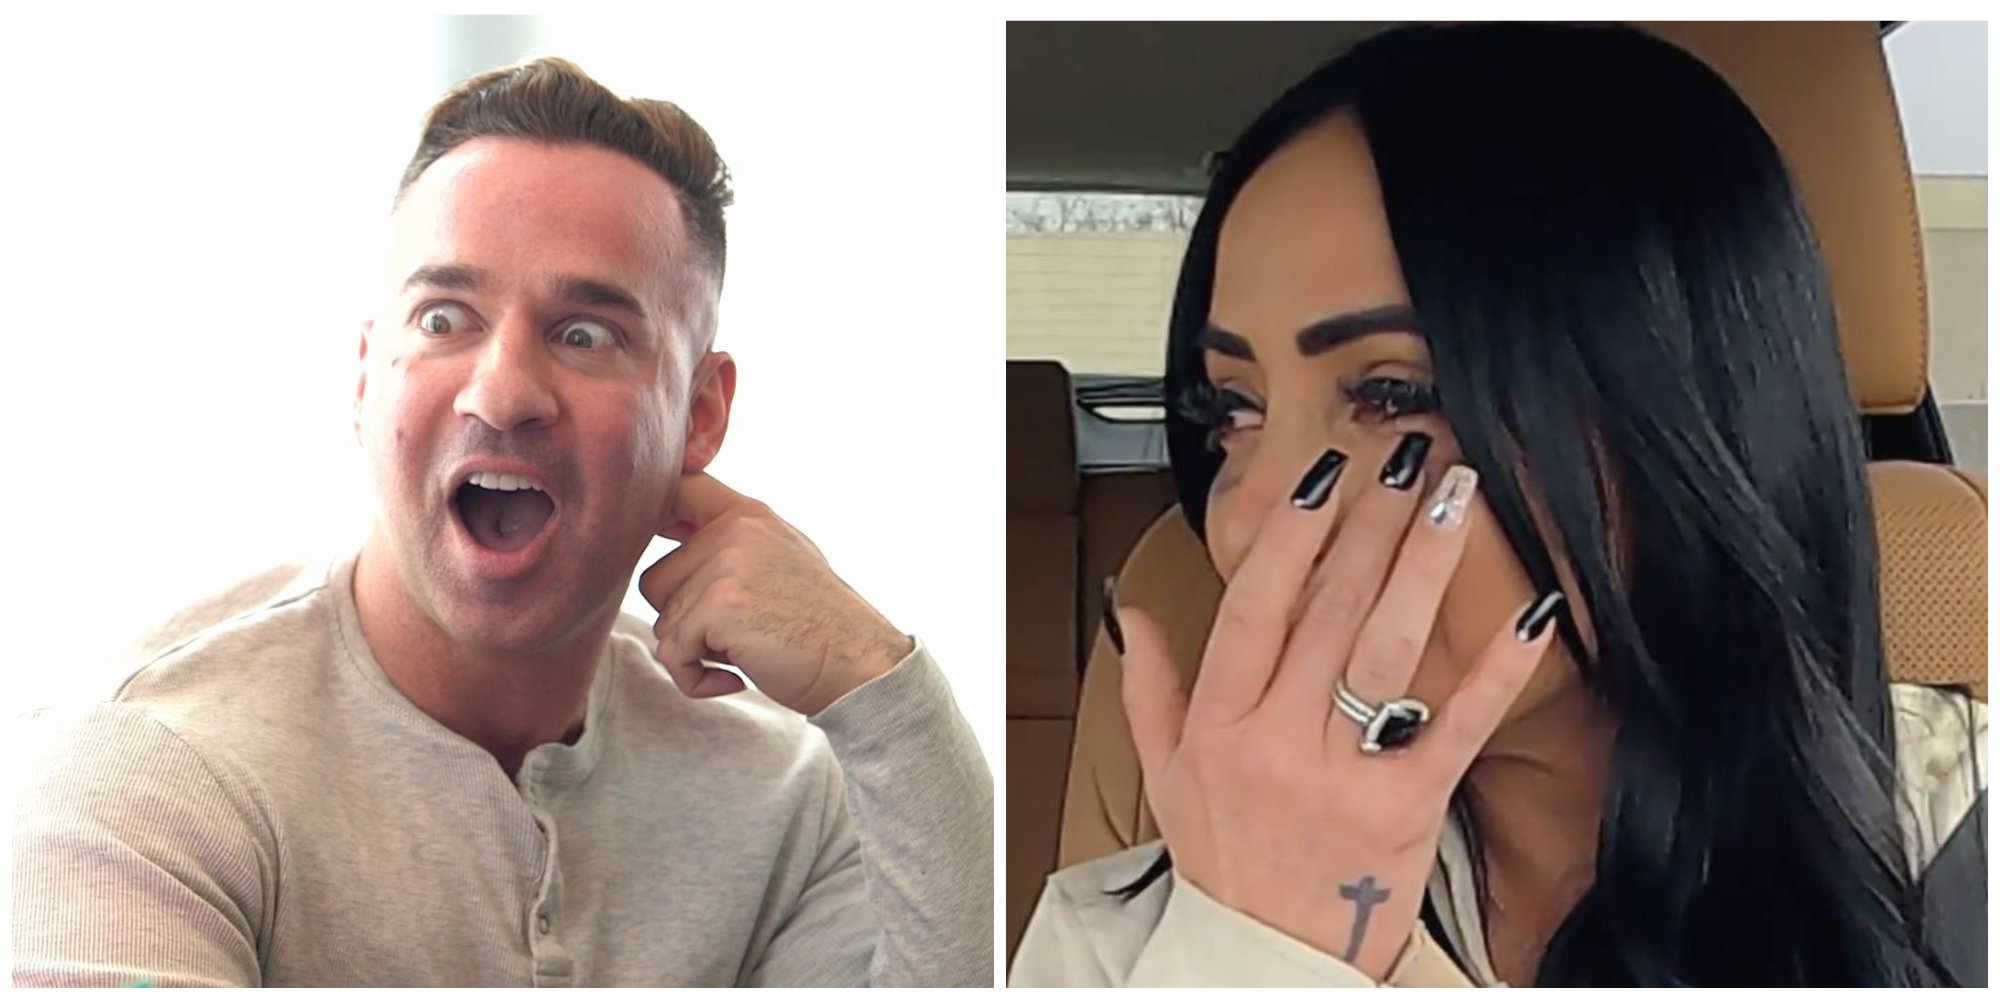 Screenshots of Mike 'The Situation' Sorrentino and Angelina Pivarnick from the July 7 episode of 'Jersey Shore: Family Vacation'